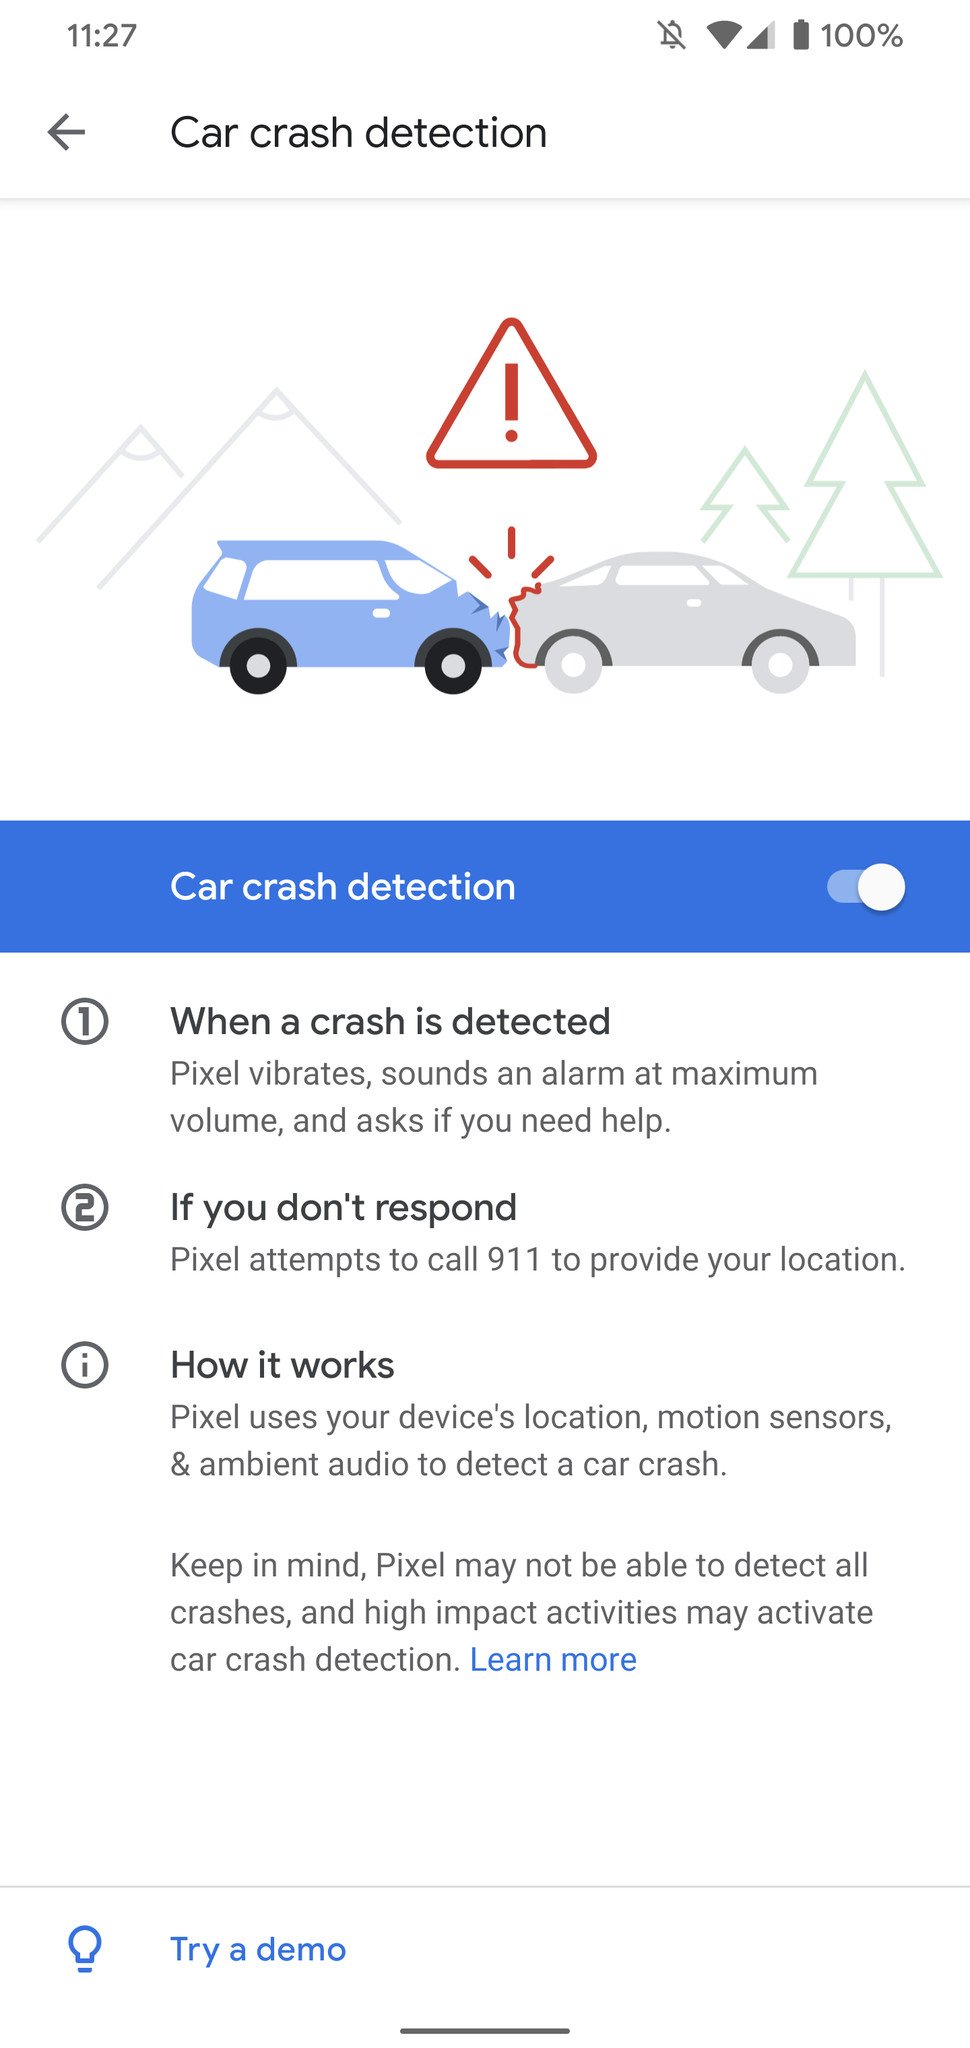 Car crash detection page in the Personal Safety app